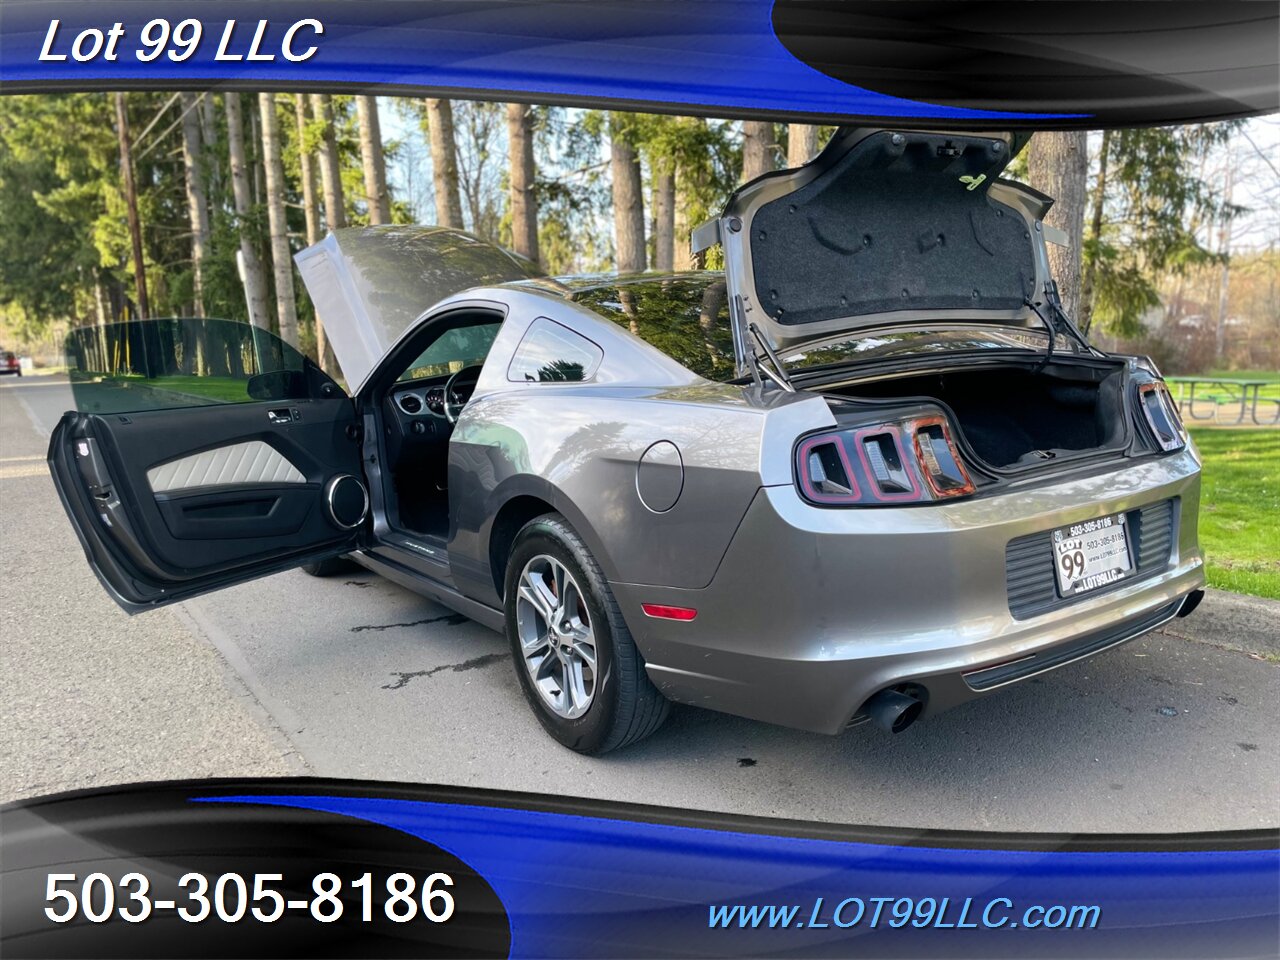 2014 Ford Mustang V6  3.7L V6 305hp  145k Miles Auto, 6-Spd SelectSh   - Photo 42 - Milwaukie, OR 97267